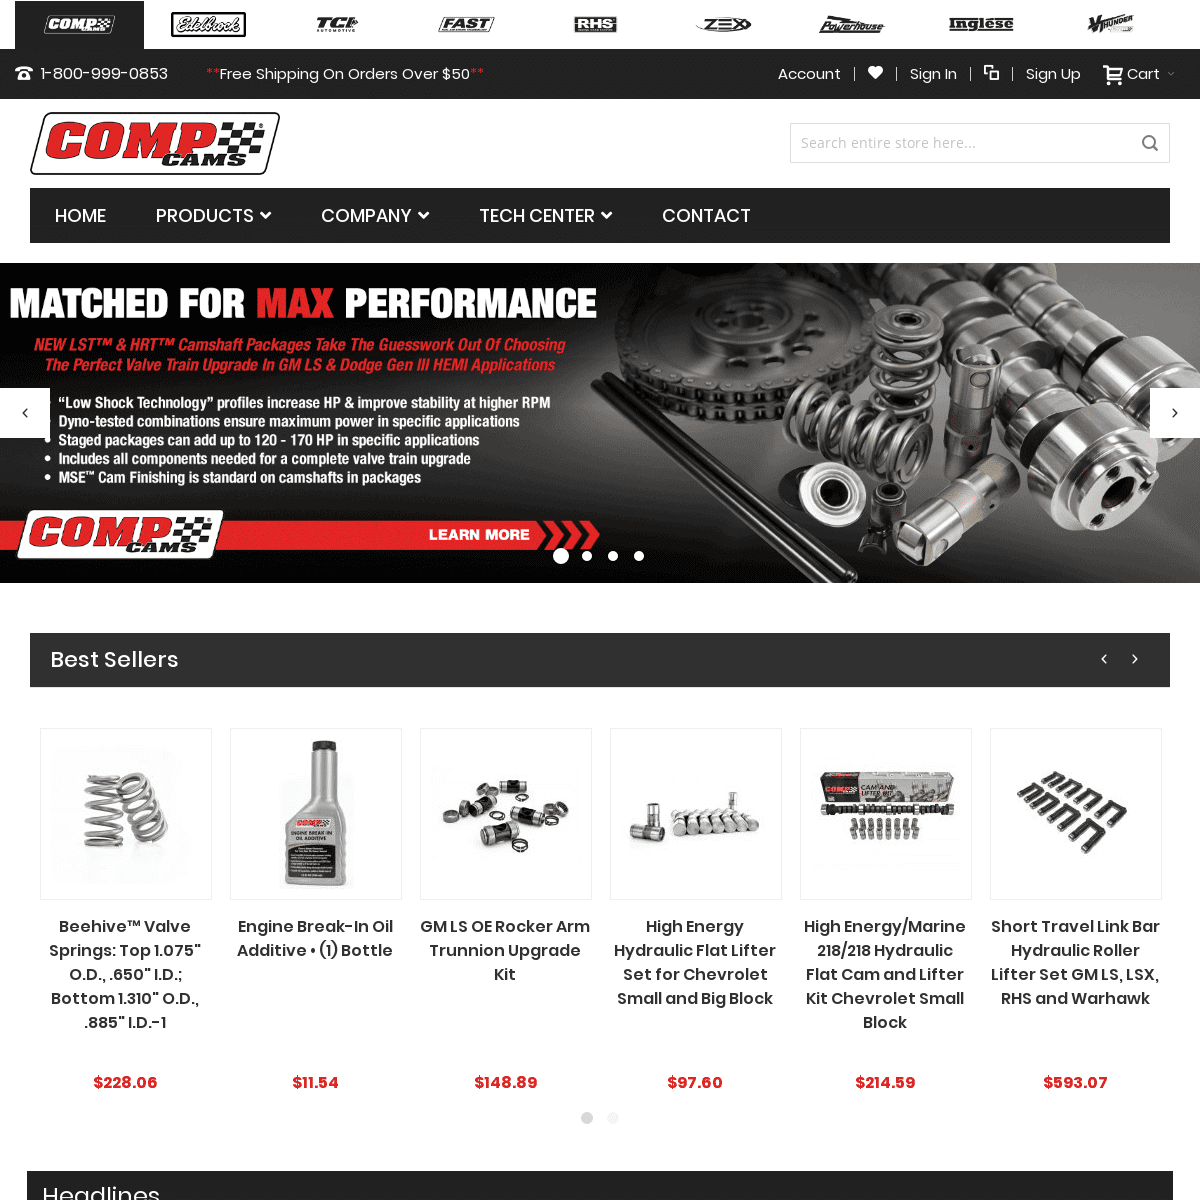 A complete backup of compcams.com